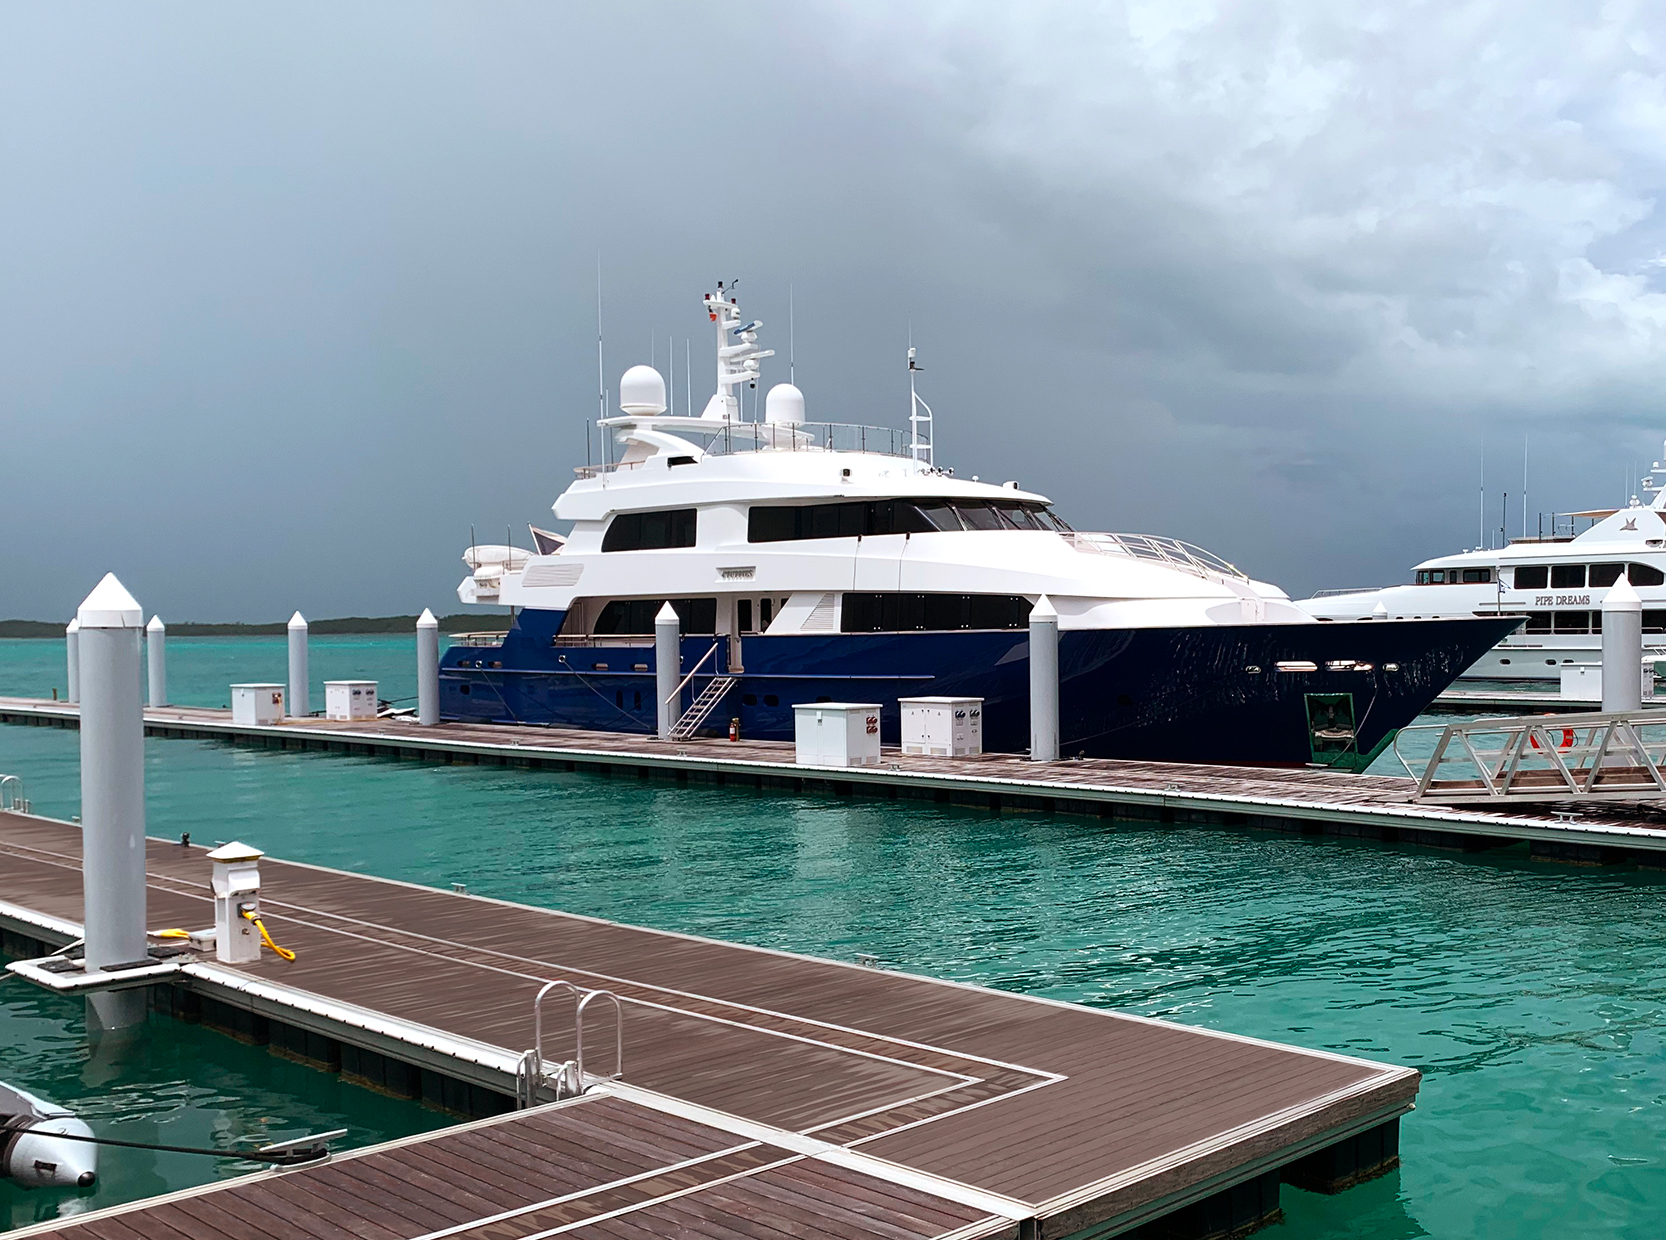 Aluminum docks with wood decking and medium-size yacht moored in the Bahamas